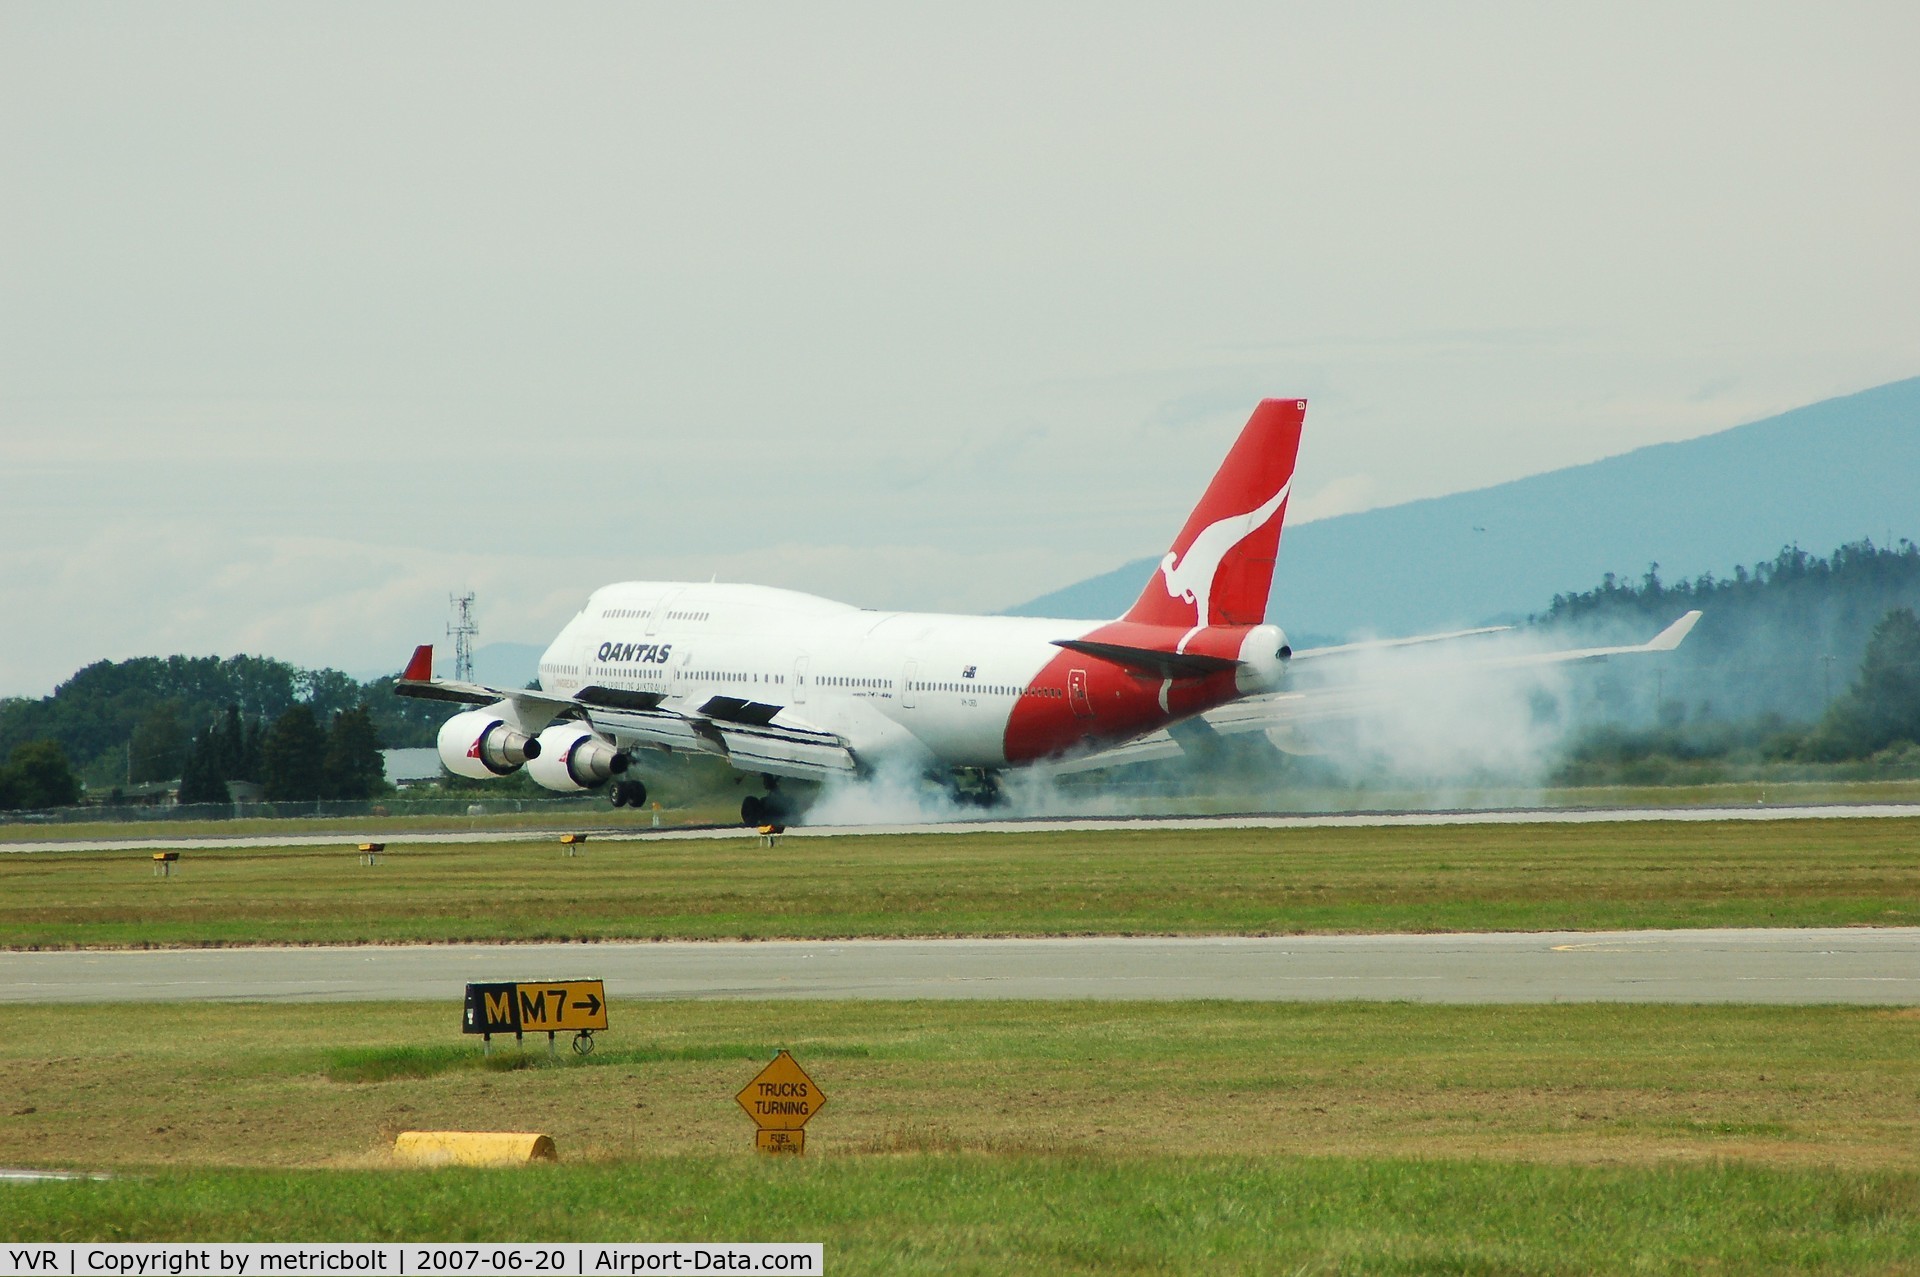 Vancouver International Airport, Vancouver, British Columbia Canada (YVR) - Qantas B747 touch down.Flight from SYD via SFO,summer 2007